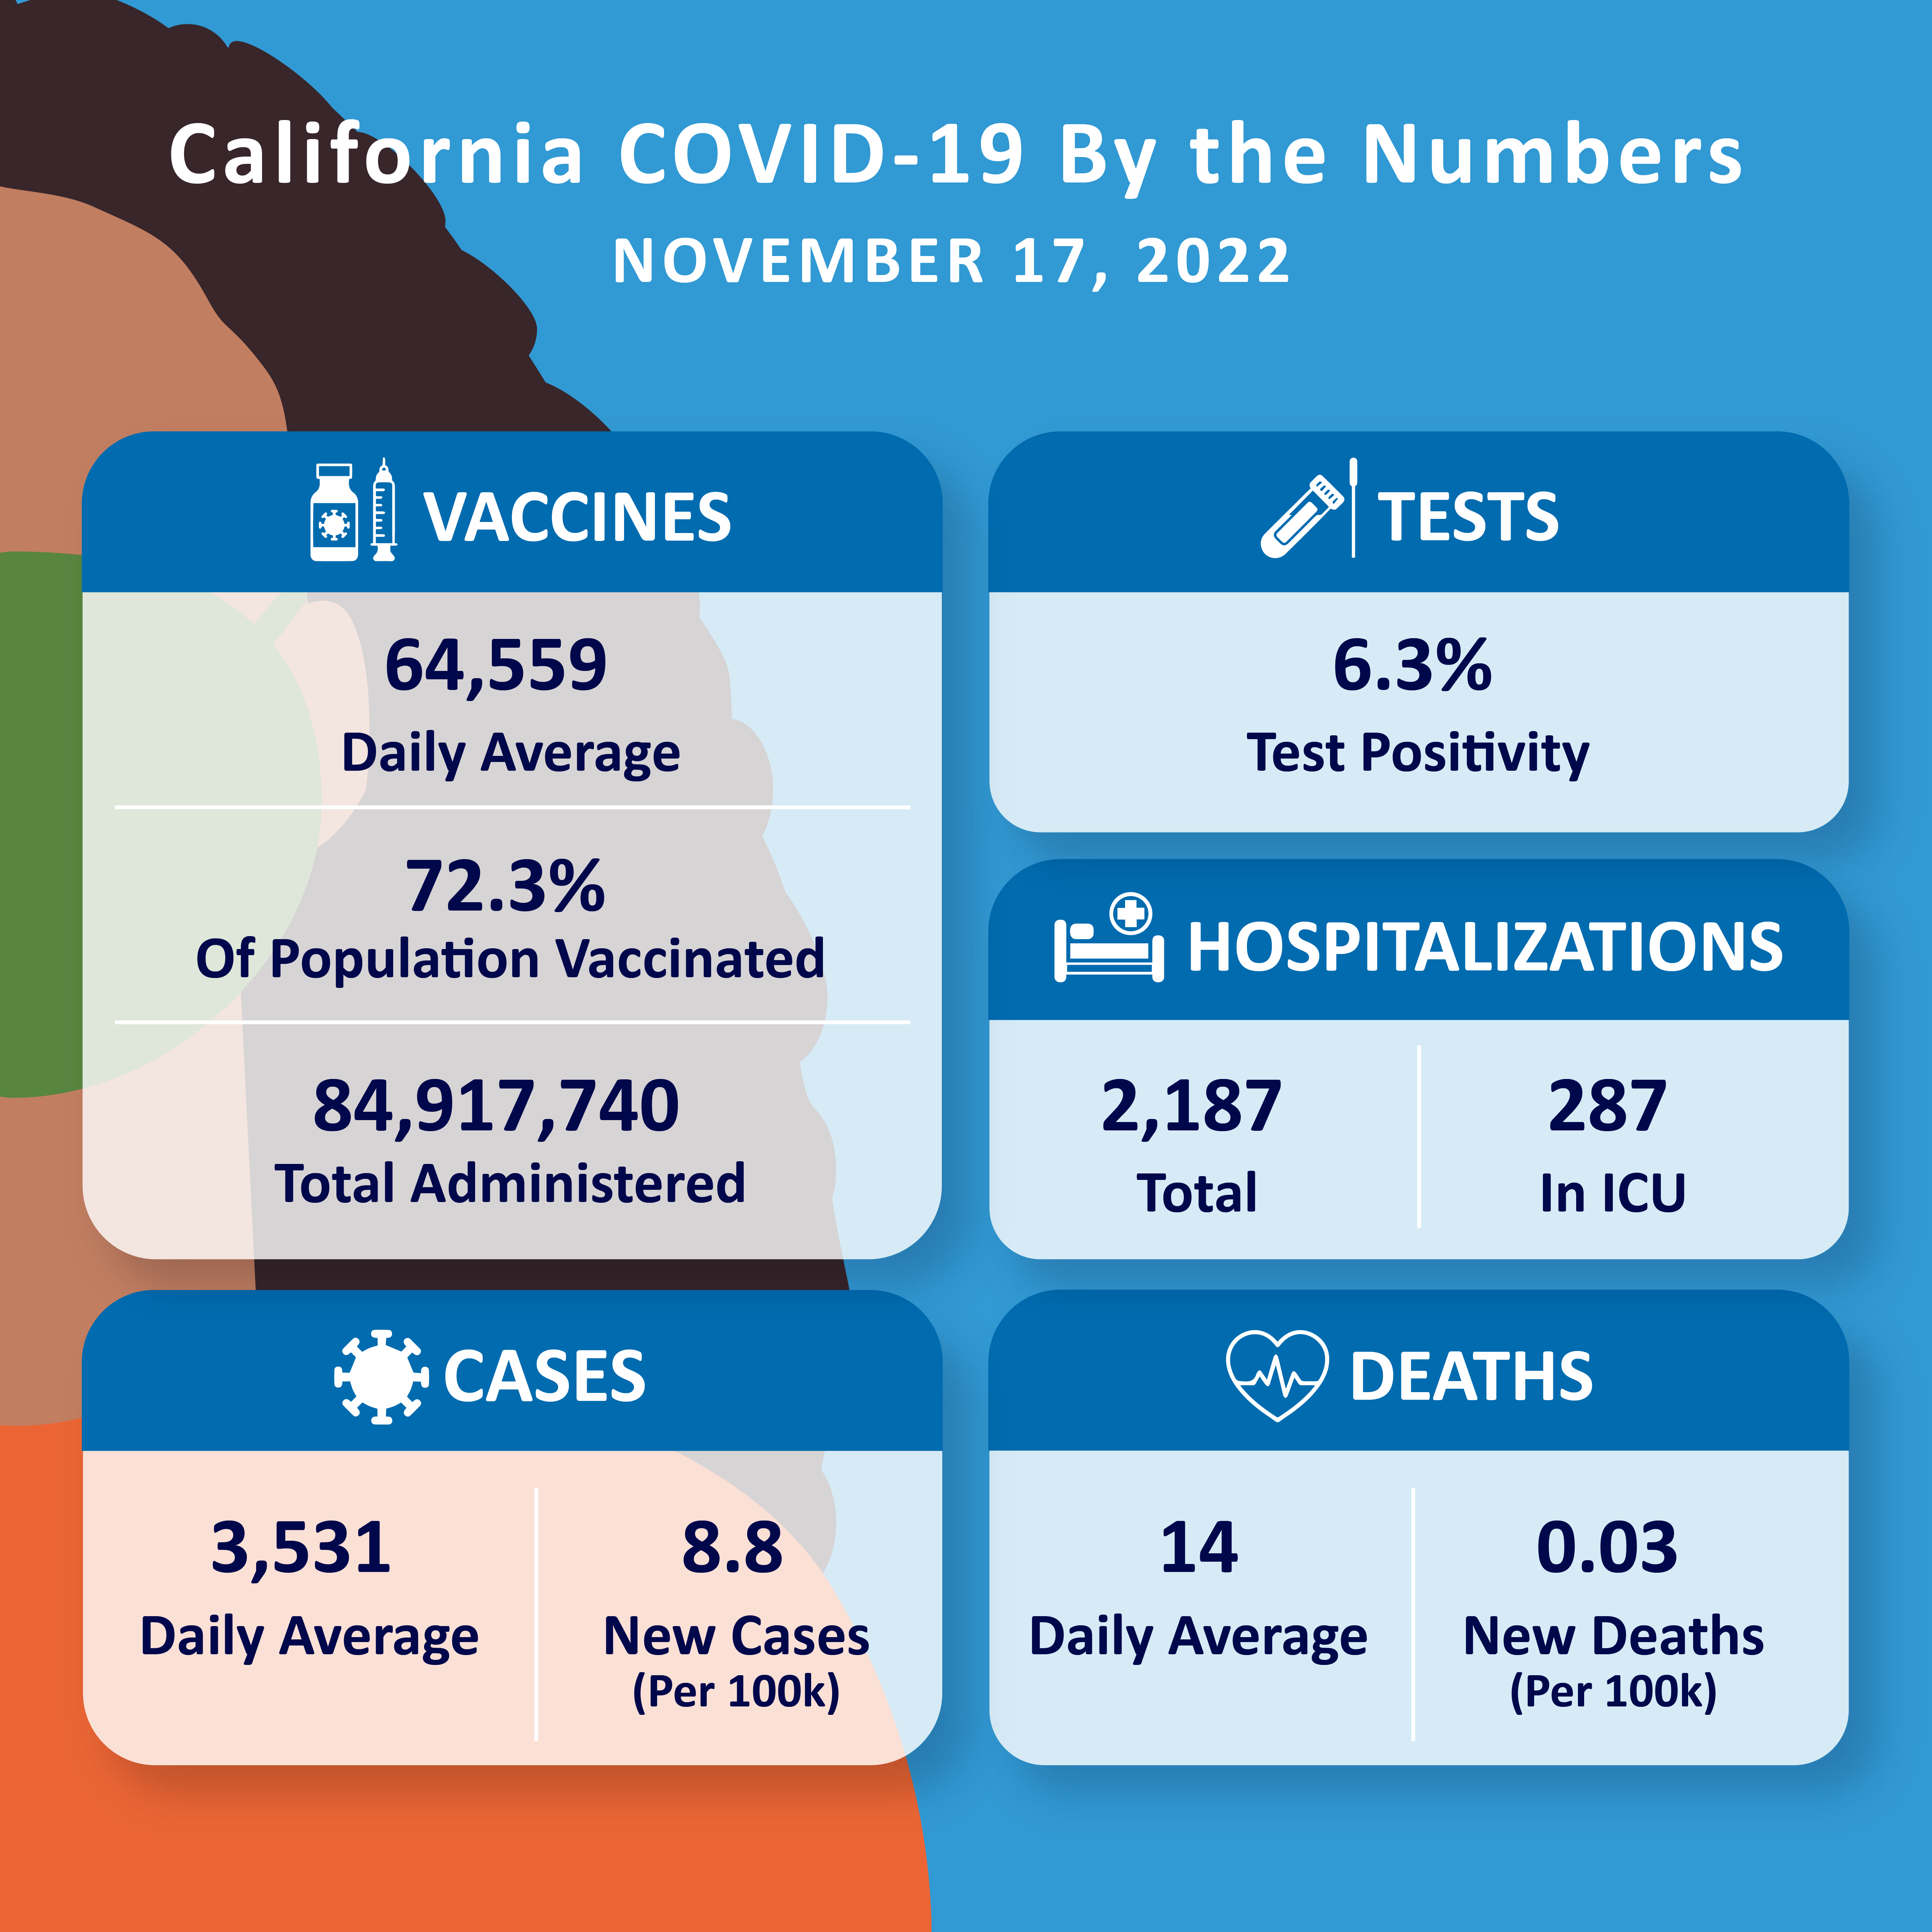 CA COVID-19 by the Numbers November 17, 2022